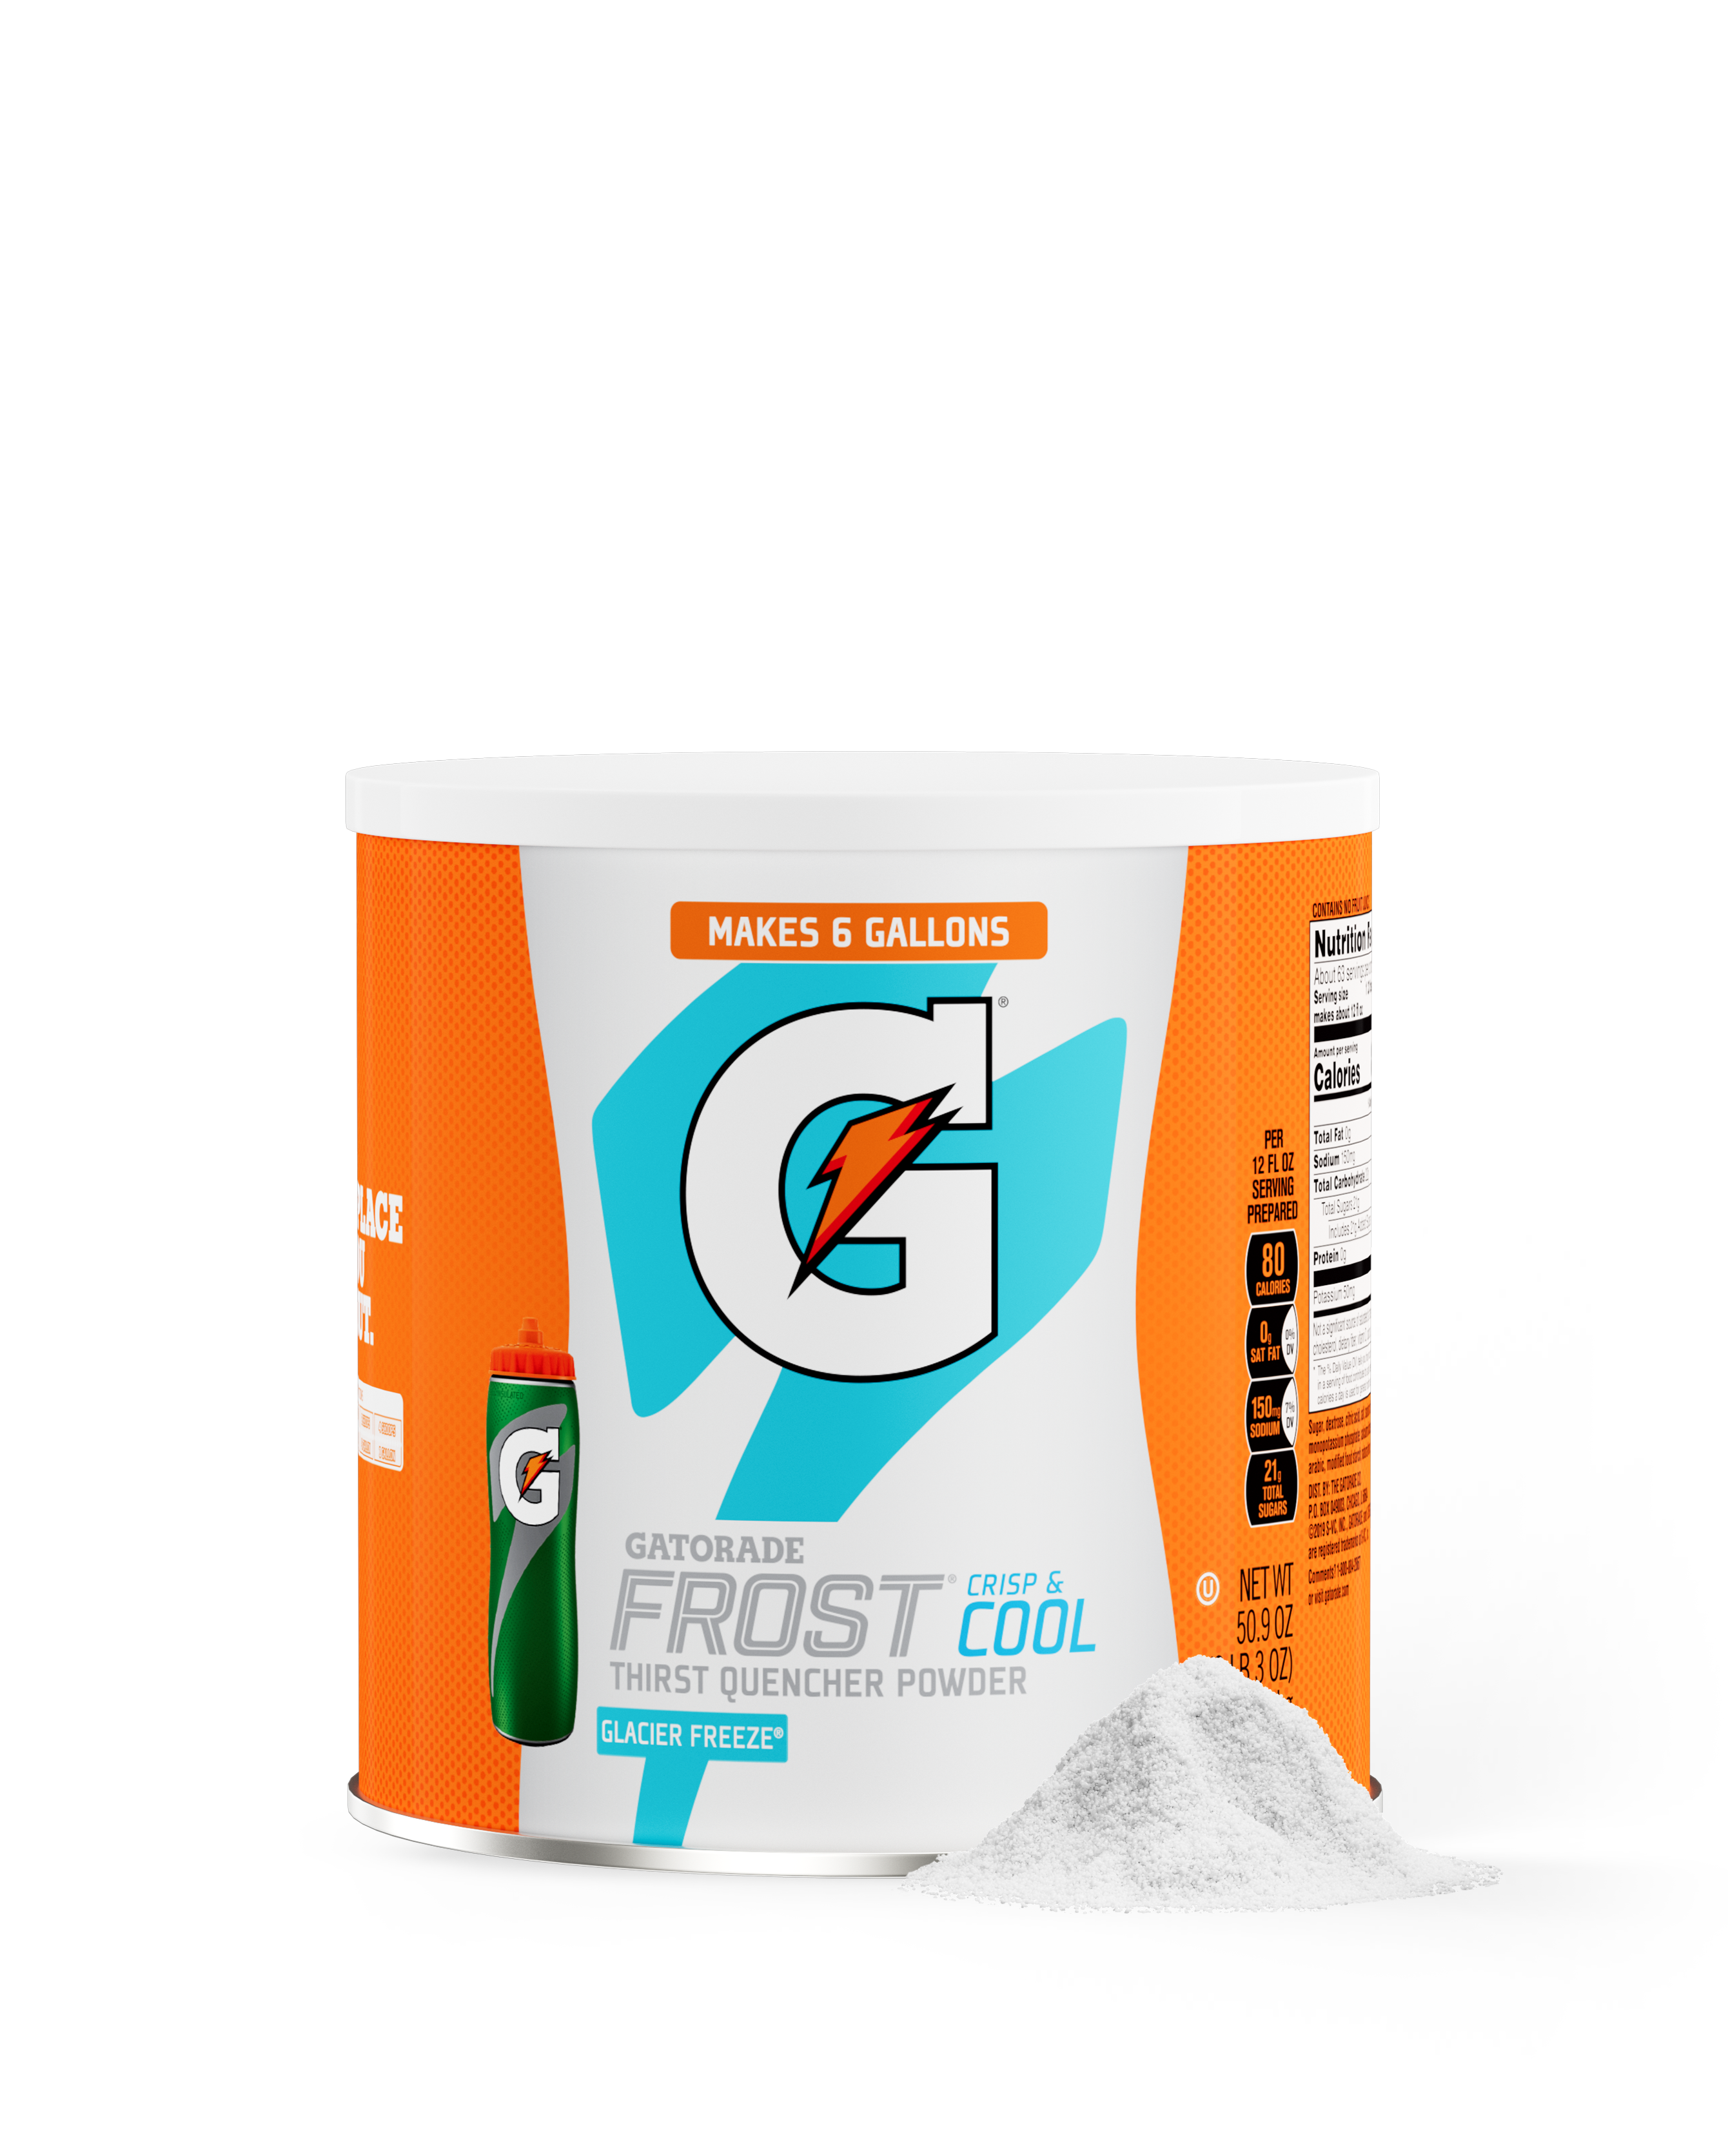 Gatorade Thirst Quencher 6 Gallon Canister Glacier Freeze Product Tile